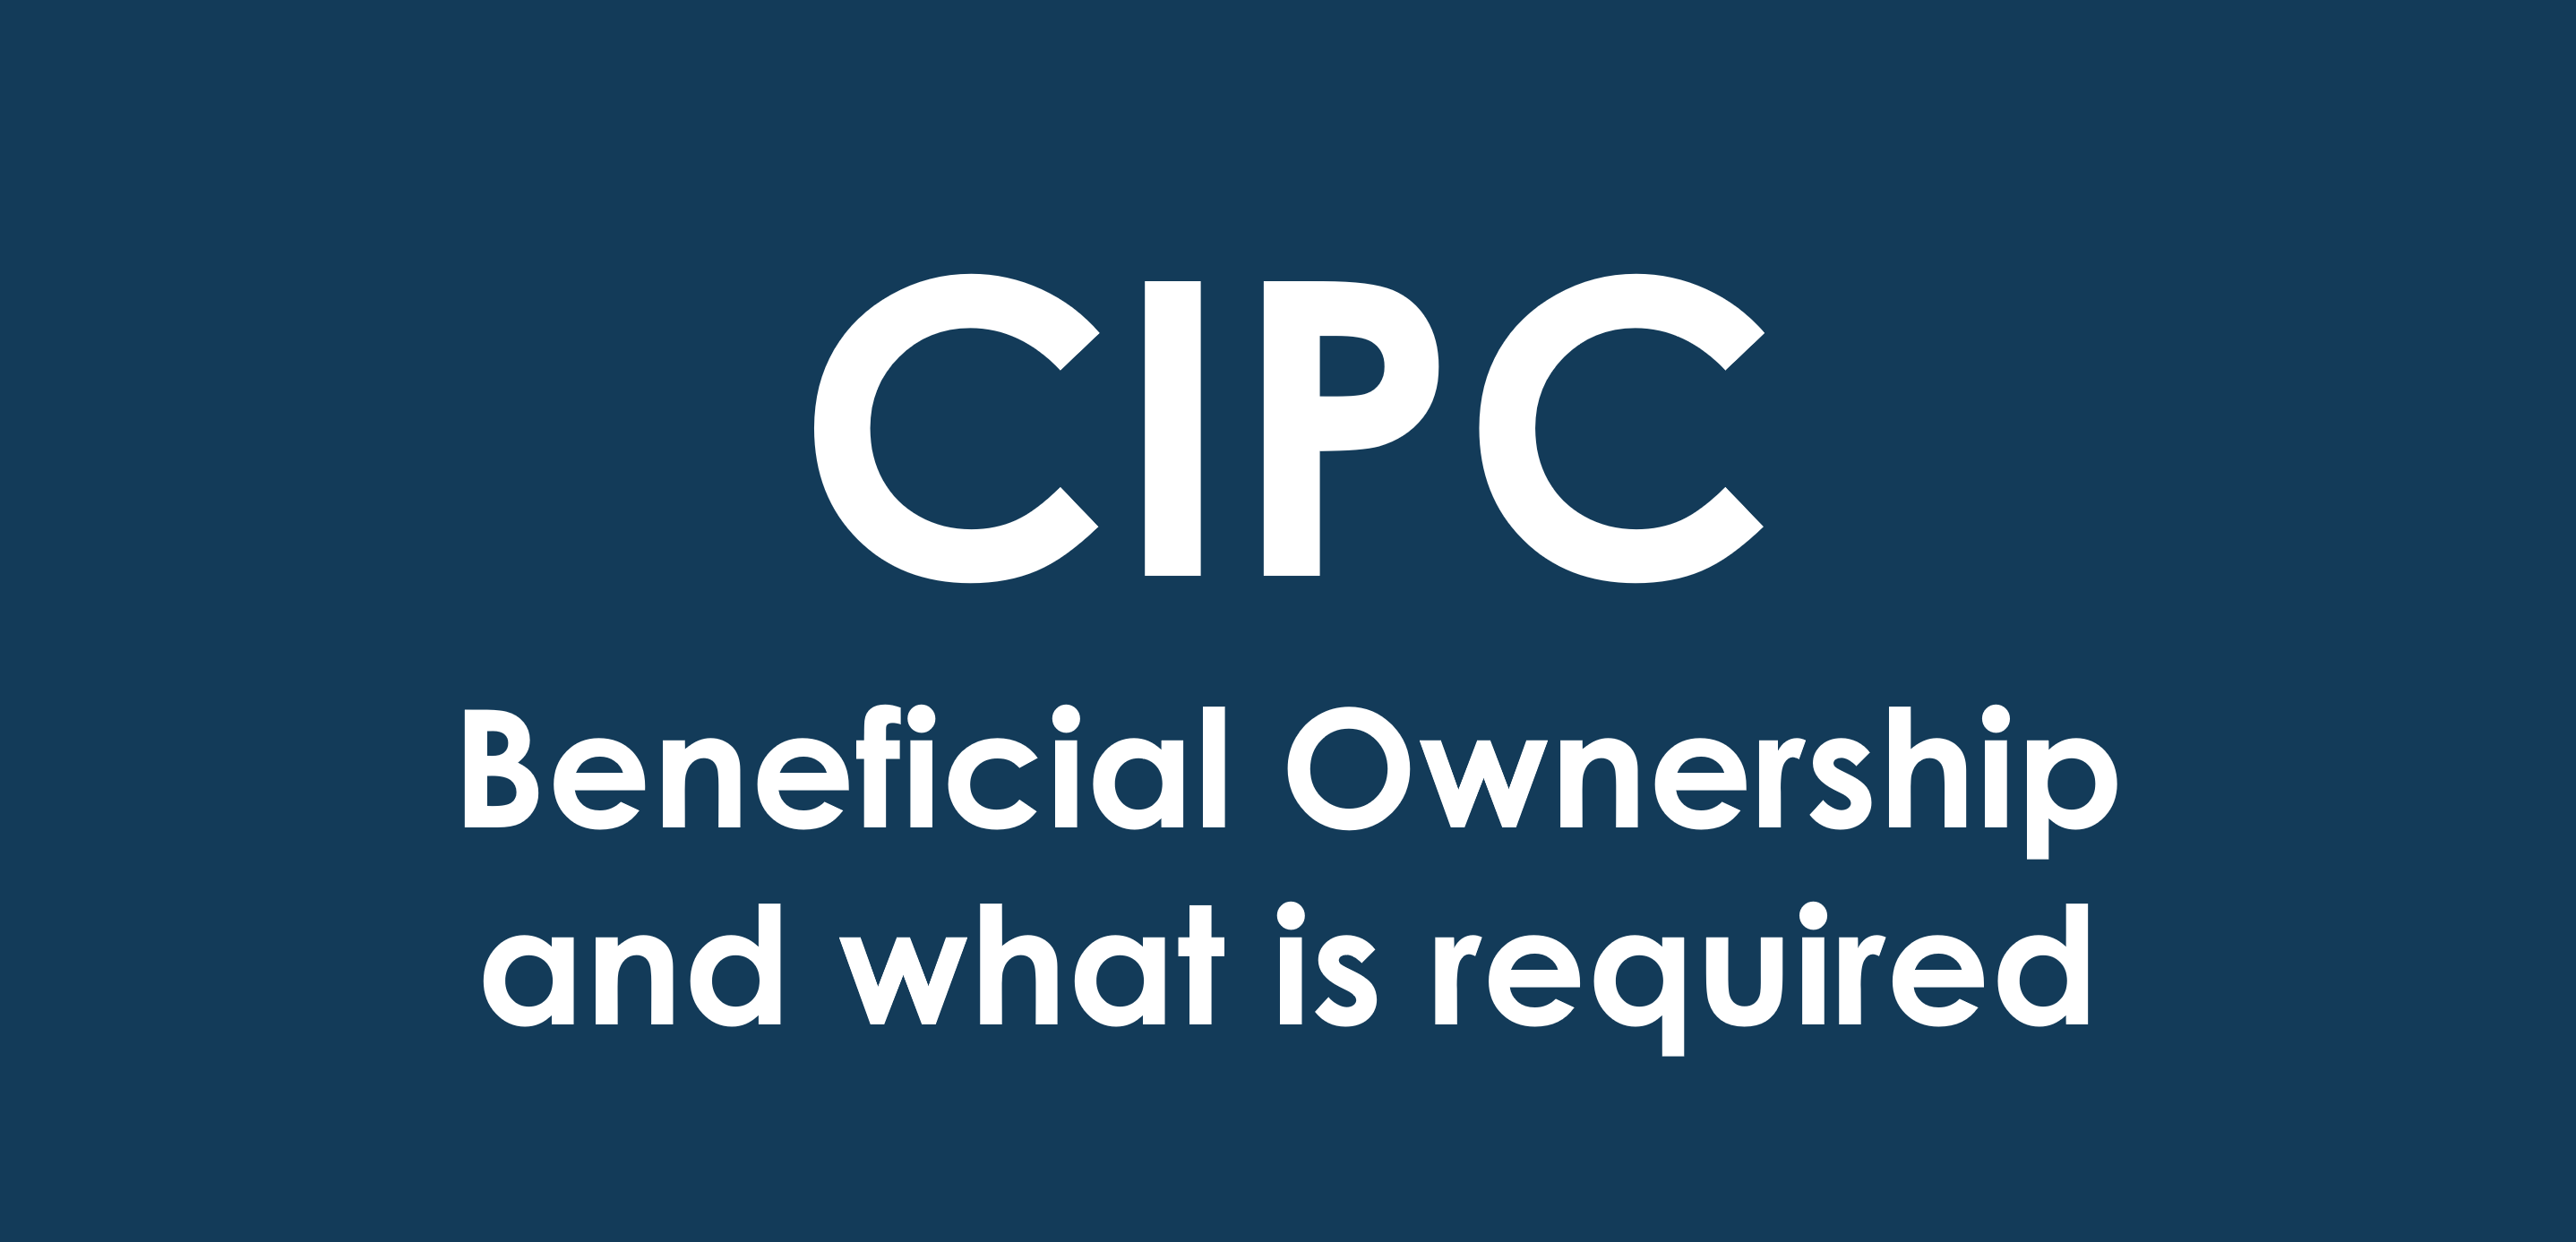 CIPC Beneficial Ownership and what is required